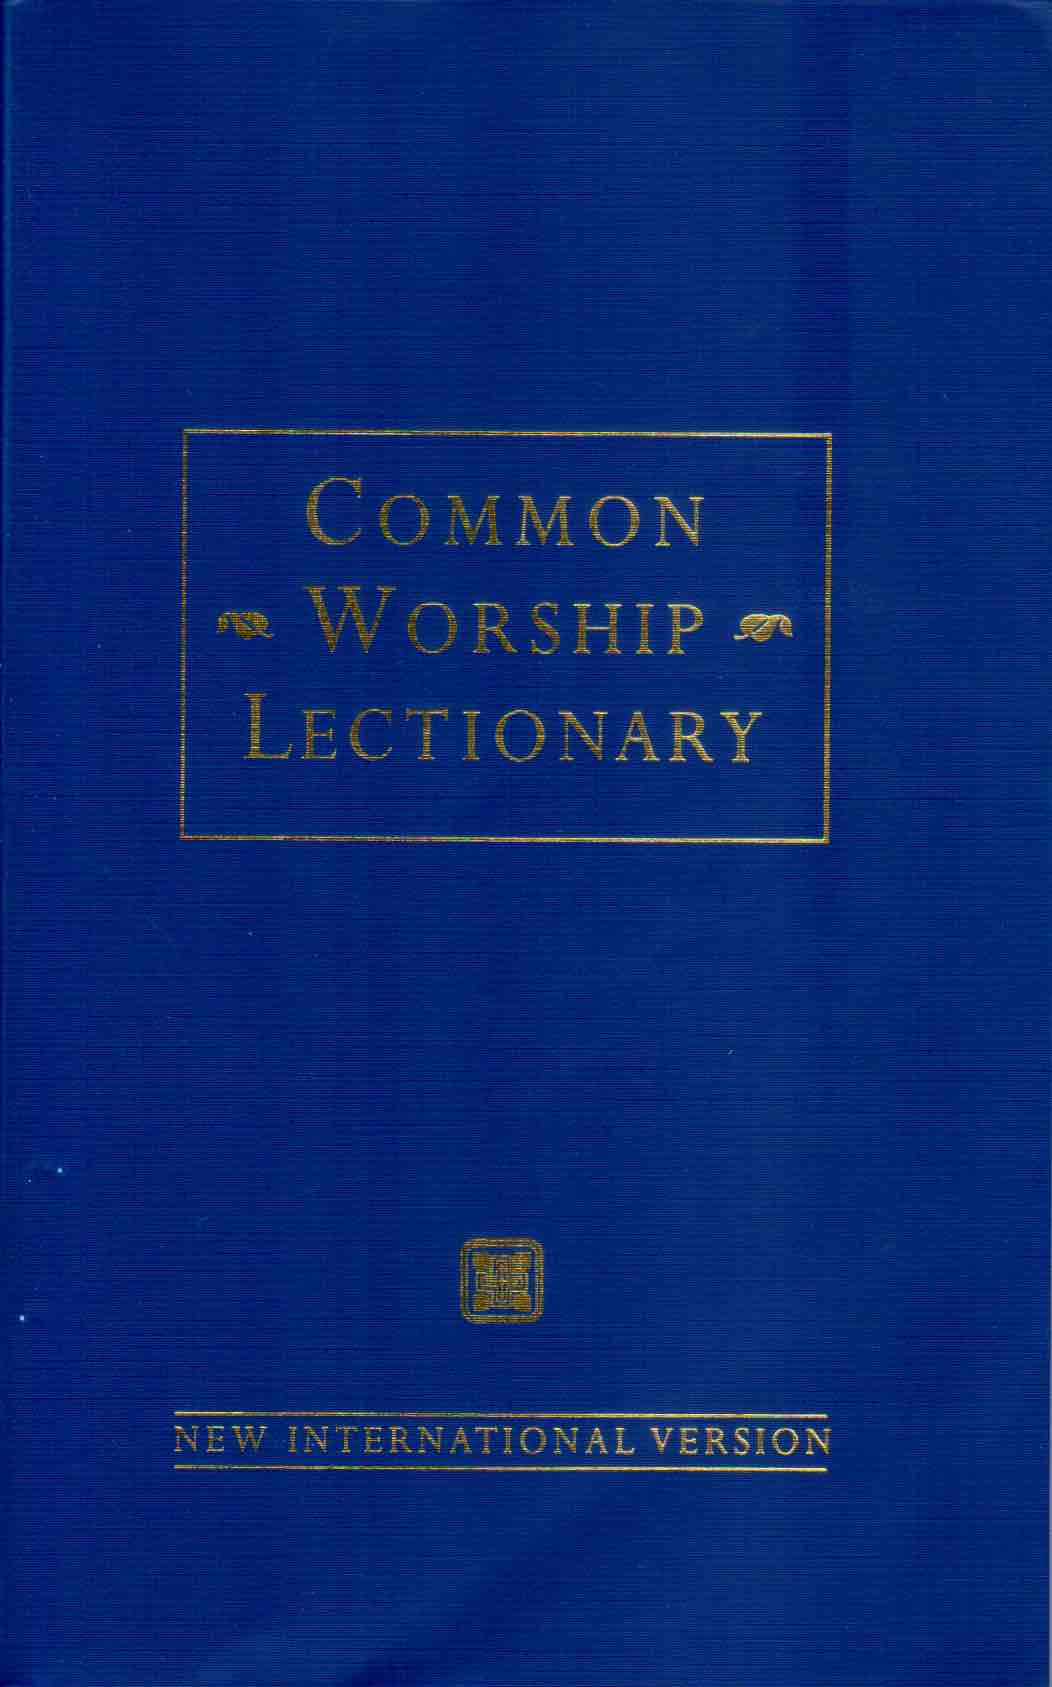 Cover of Common Worship Lectionary